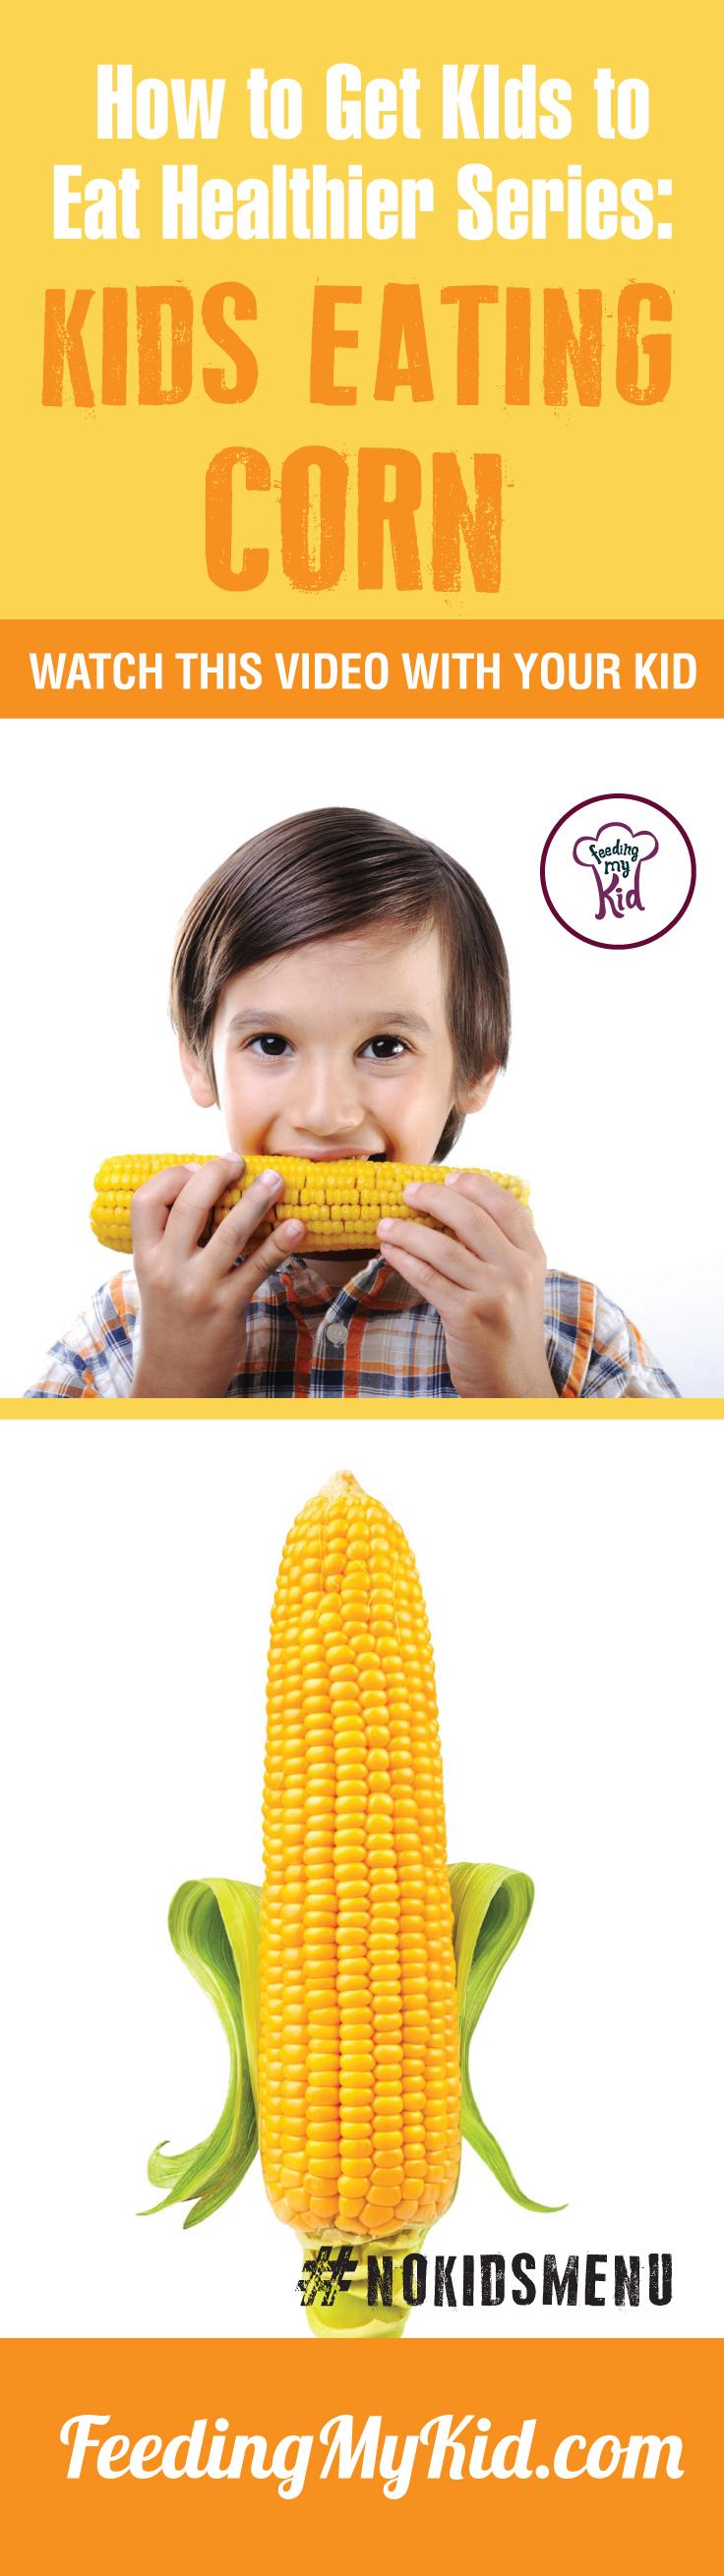 Want to get your children eating corn? Teach your kids how to eat more vegetables and fruits. Watch these videos with your kids of children eating veggies and fruits and get your kids to eat veggies and fruits. Find out how it works here. Feeding My Kid is a filled with all the information you need about how to raise your kids, from healthy tips to nutritious recipes. #pickyeating #getkidstoeat #corn #NoKidsMenu